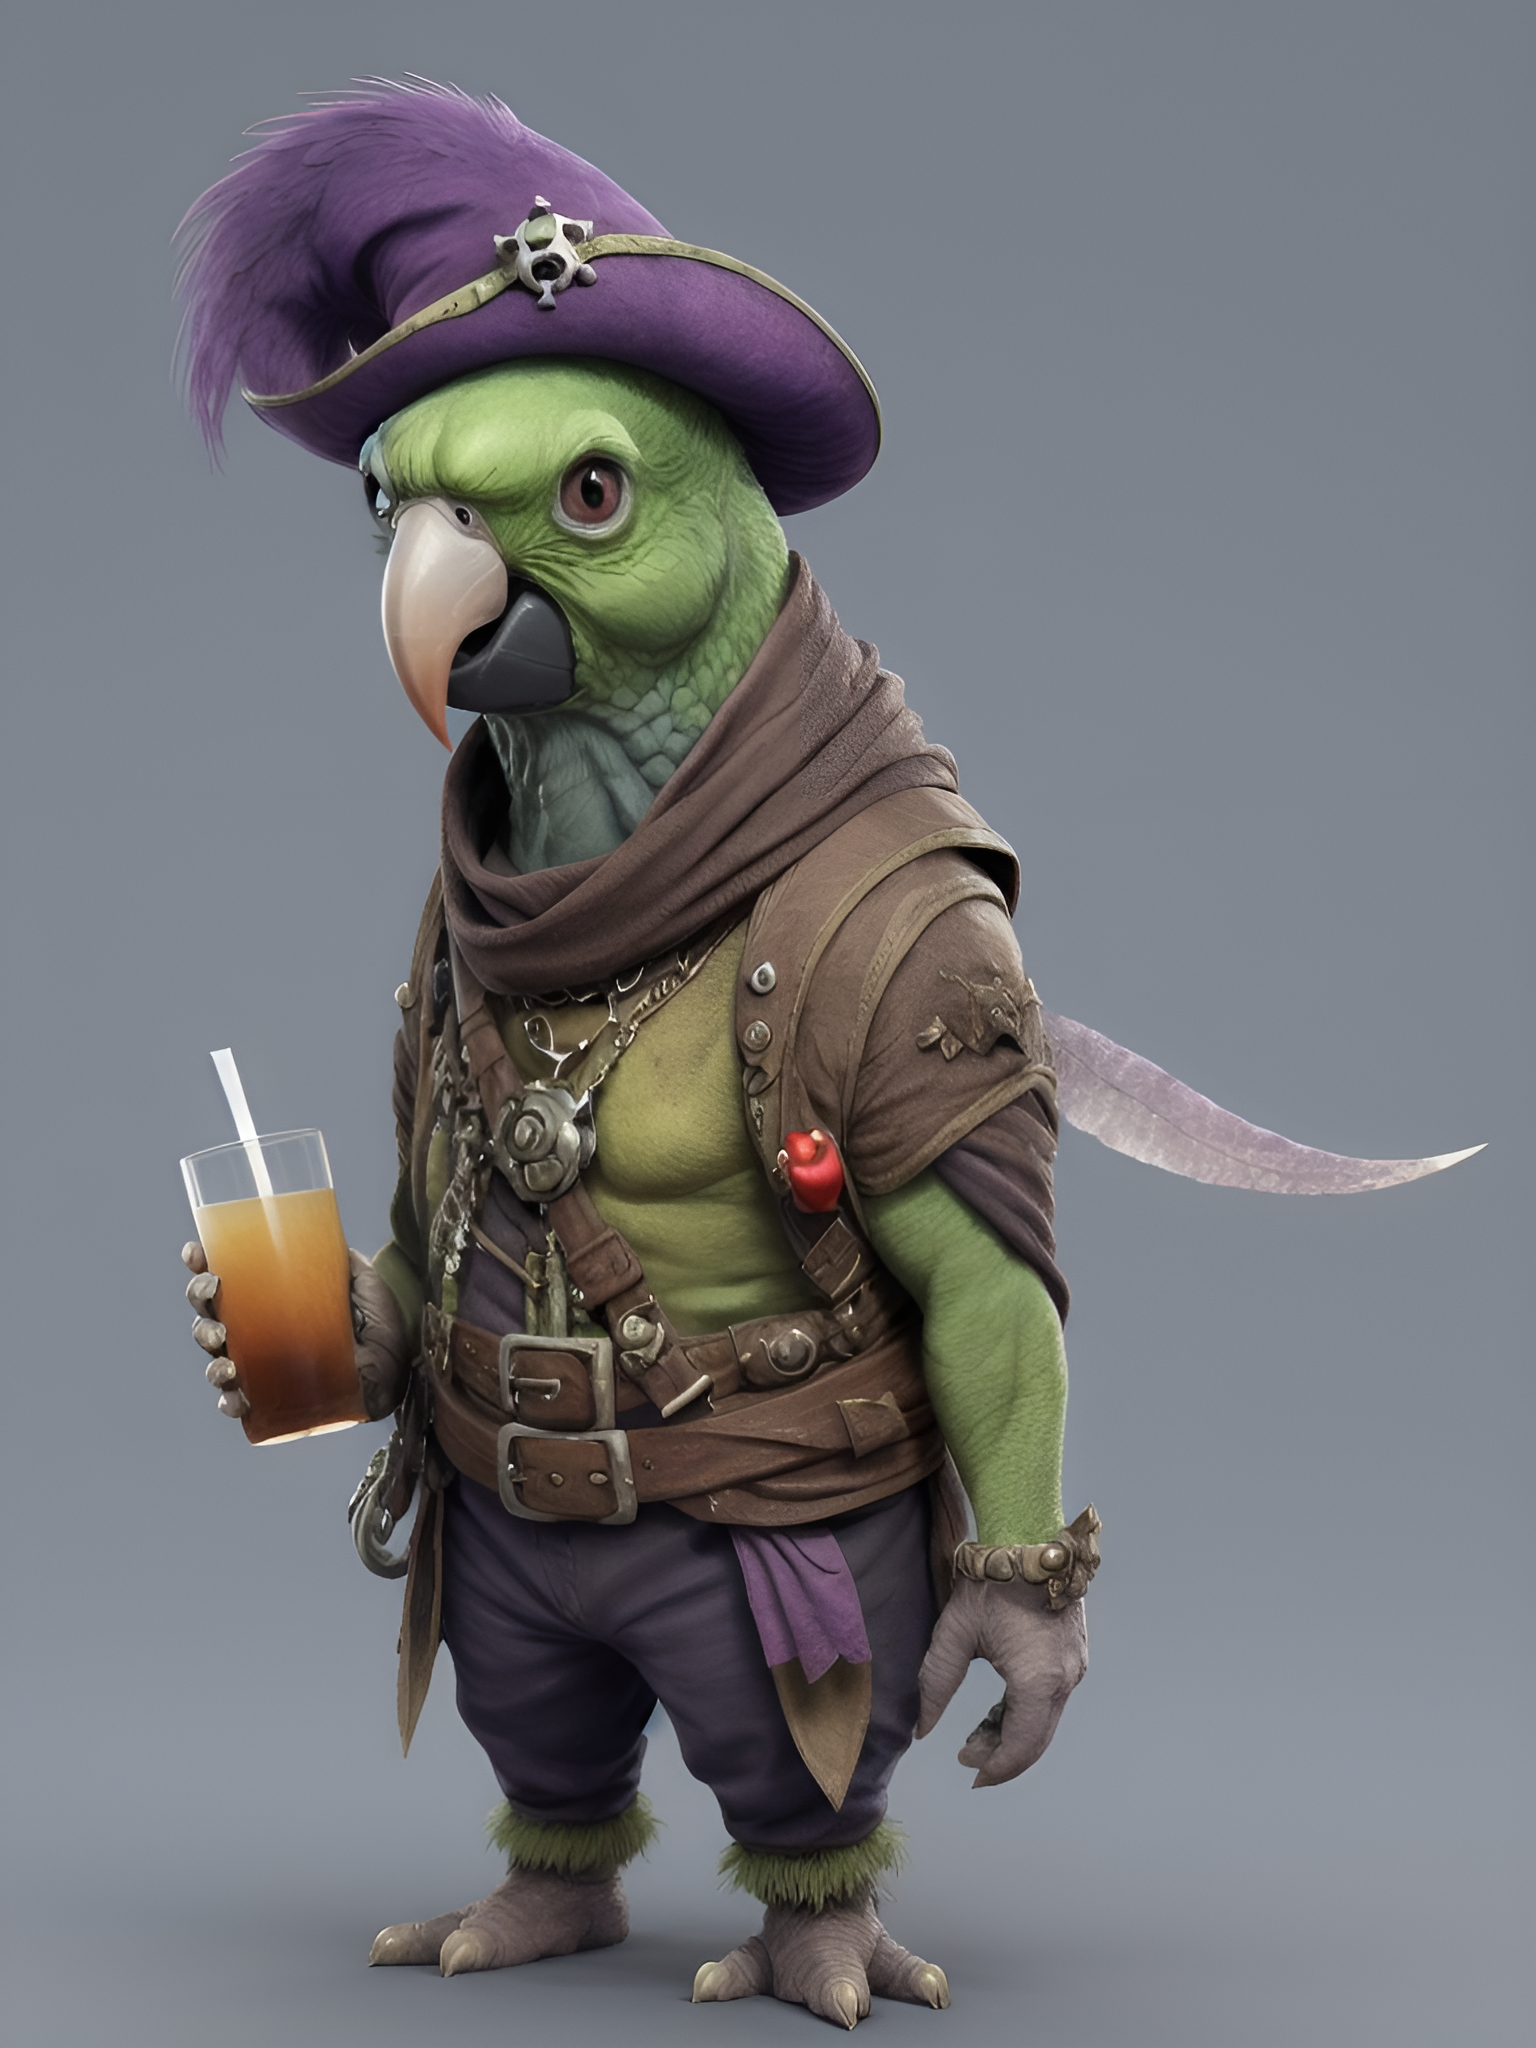 General 1536x2048 AI art parrot pirate hat drink humanoid animals birds portrait display simple background